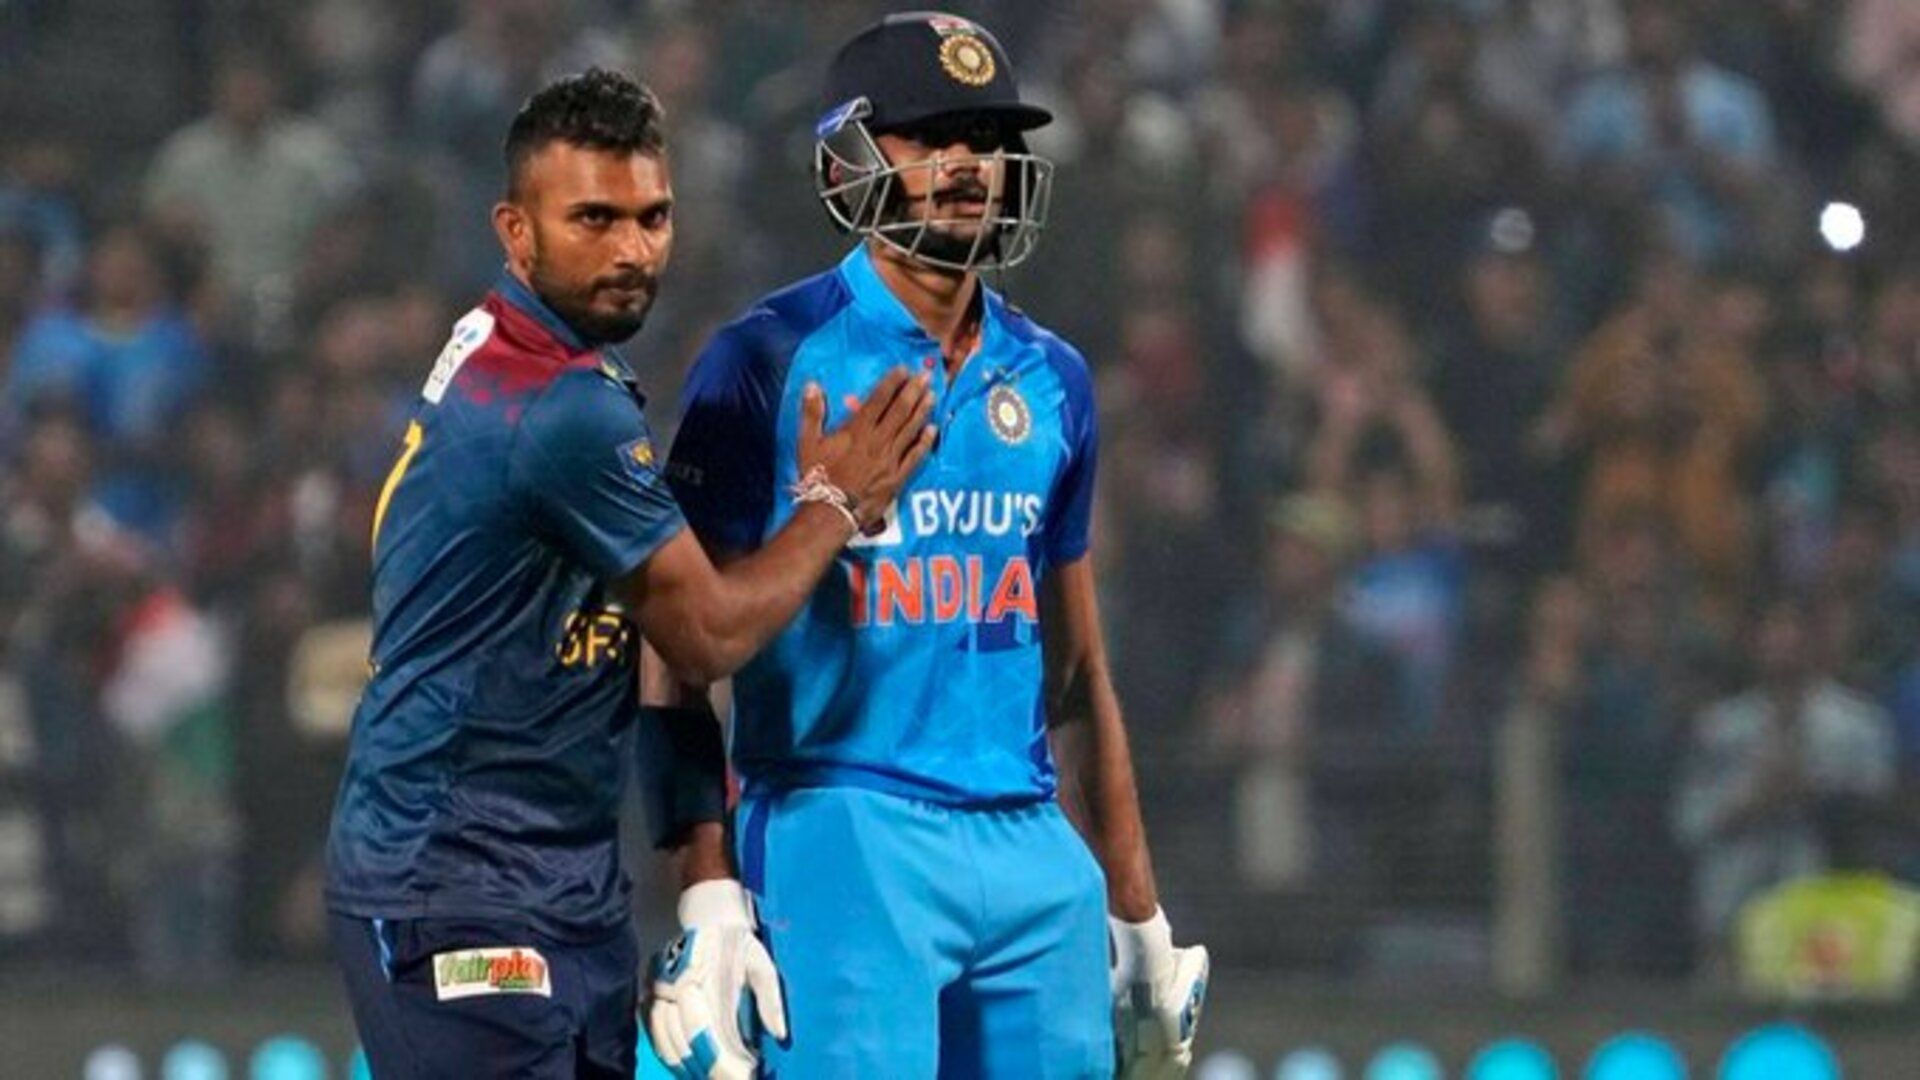 Axar Patel scored 65 off 31 balls and picked two wickets in 2nd T20I